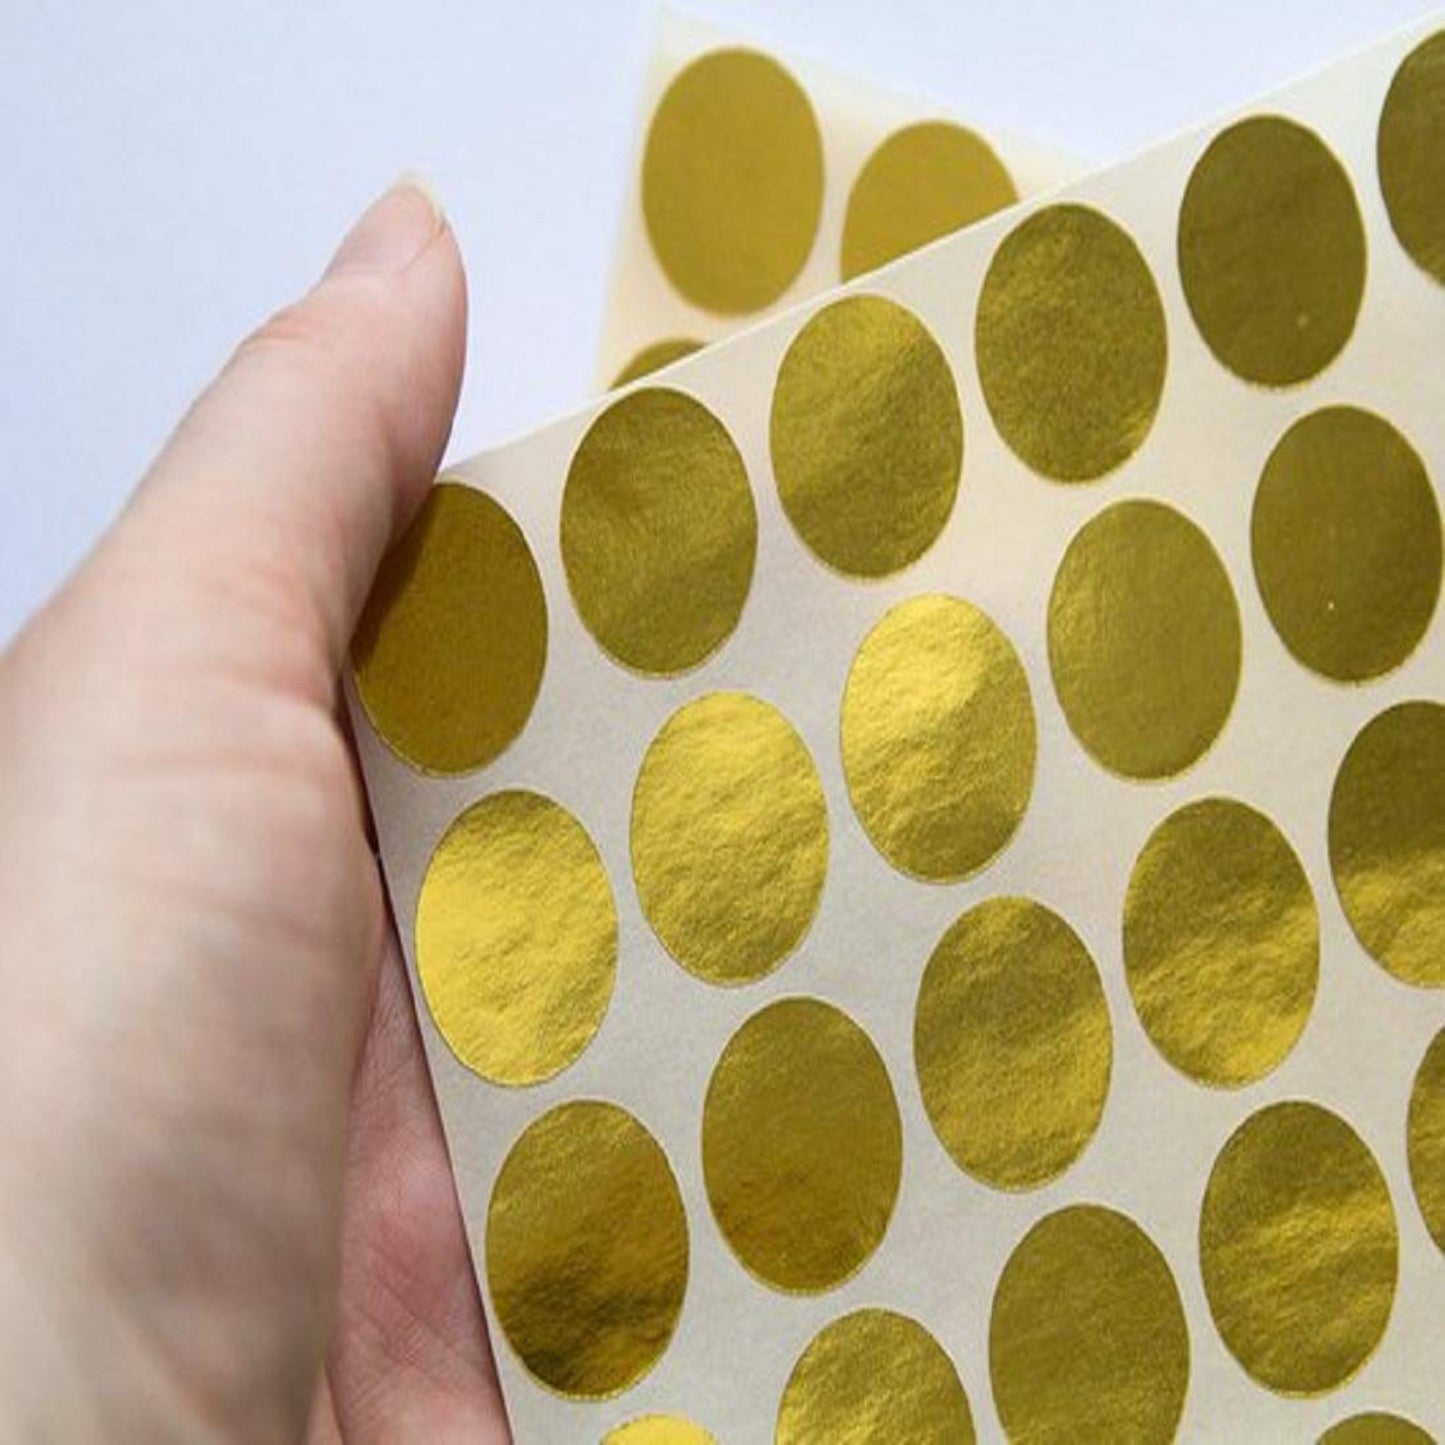 AccuPrints Gold Stickers 2.5 cm - Perfect for Envelope Closure in Invitation